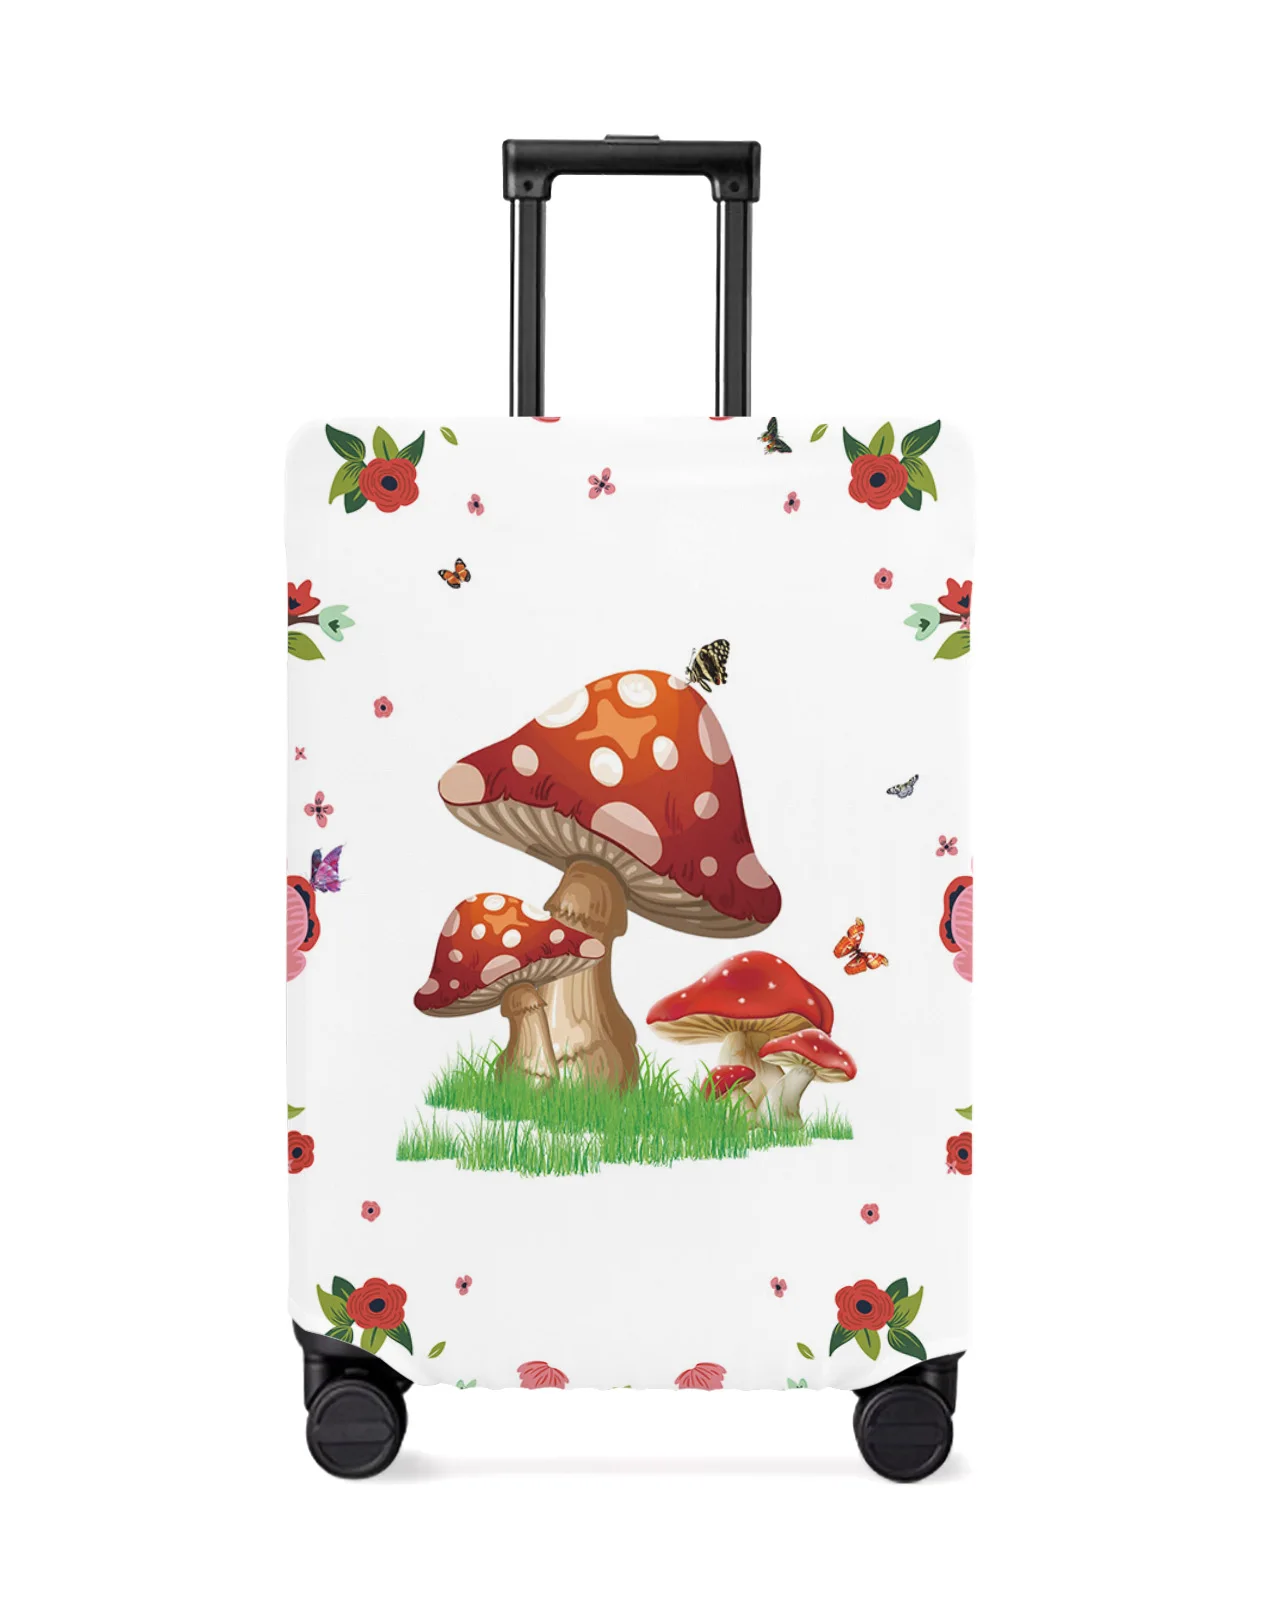 

Flower Butterfly Mushroom Luggage Cover Stretch Suitcase Protector Baggage Dust Case Cover for 18-32 Inch Travel Suitcase Case